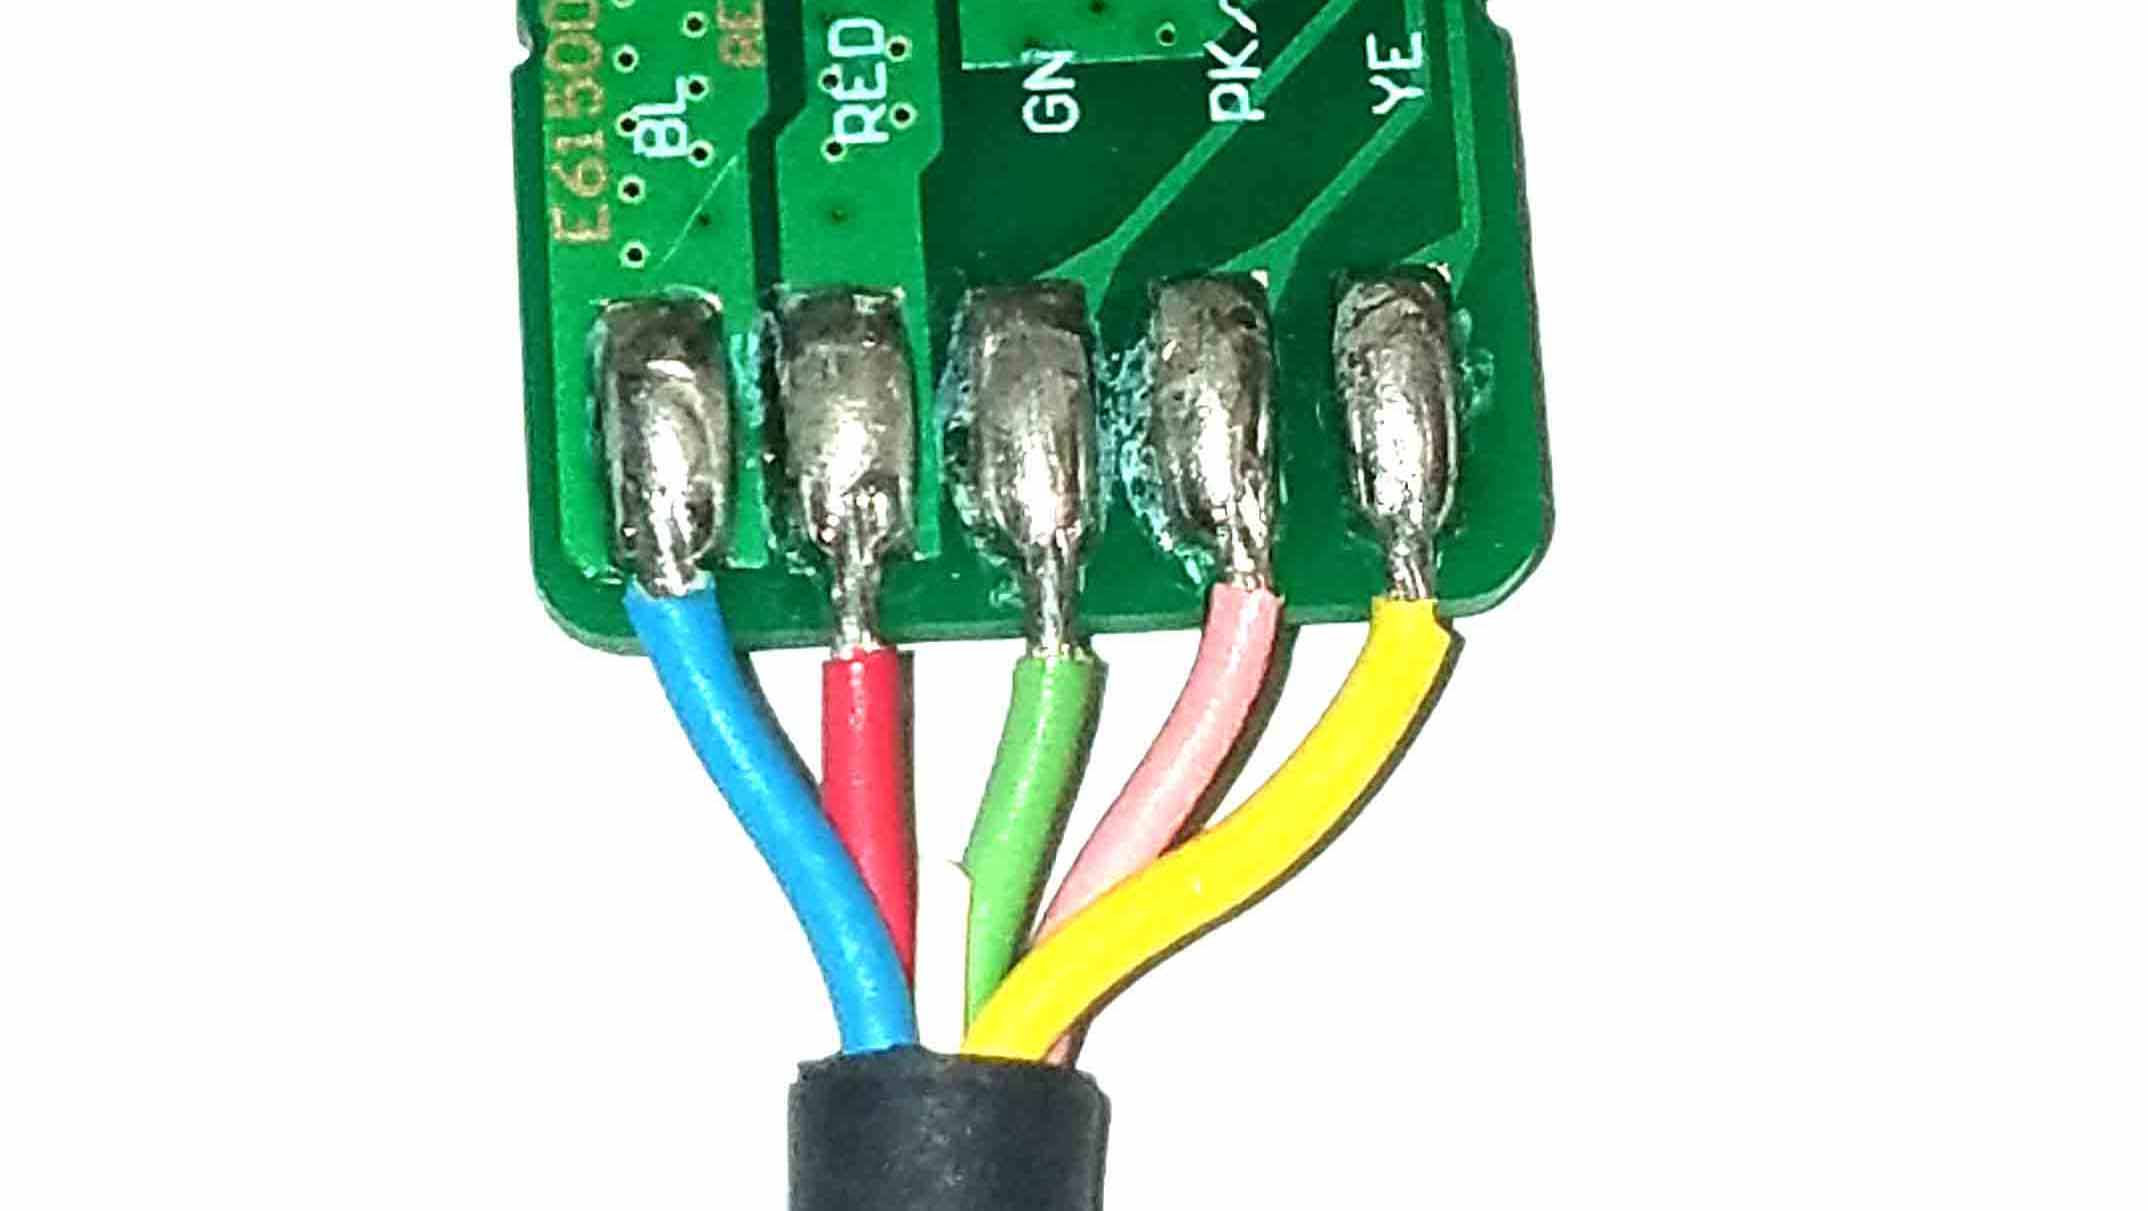 New Benefits With Automated Soldering Innovations Wiring Harness News 